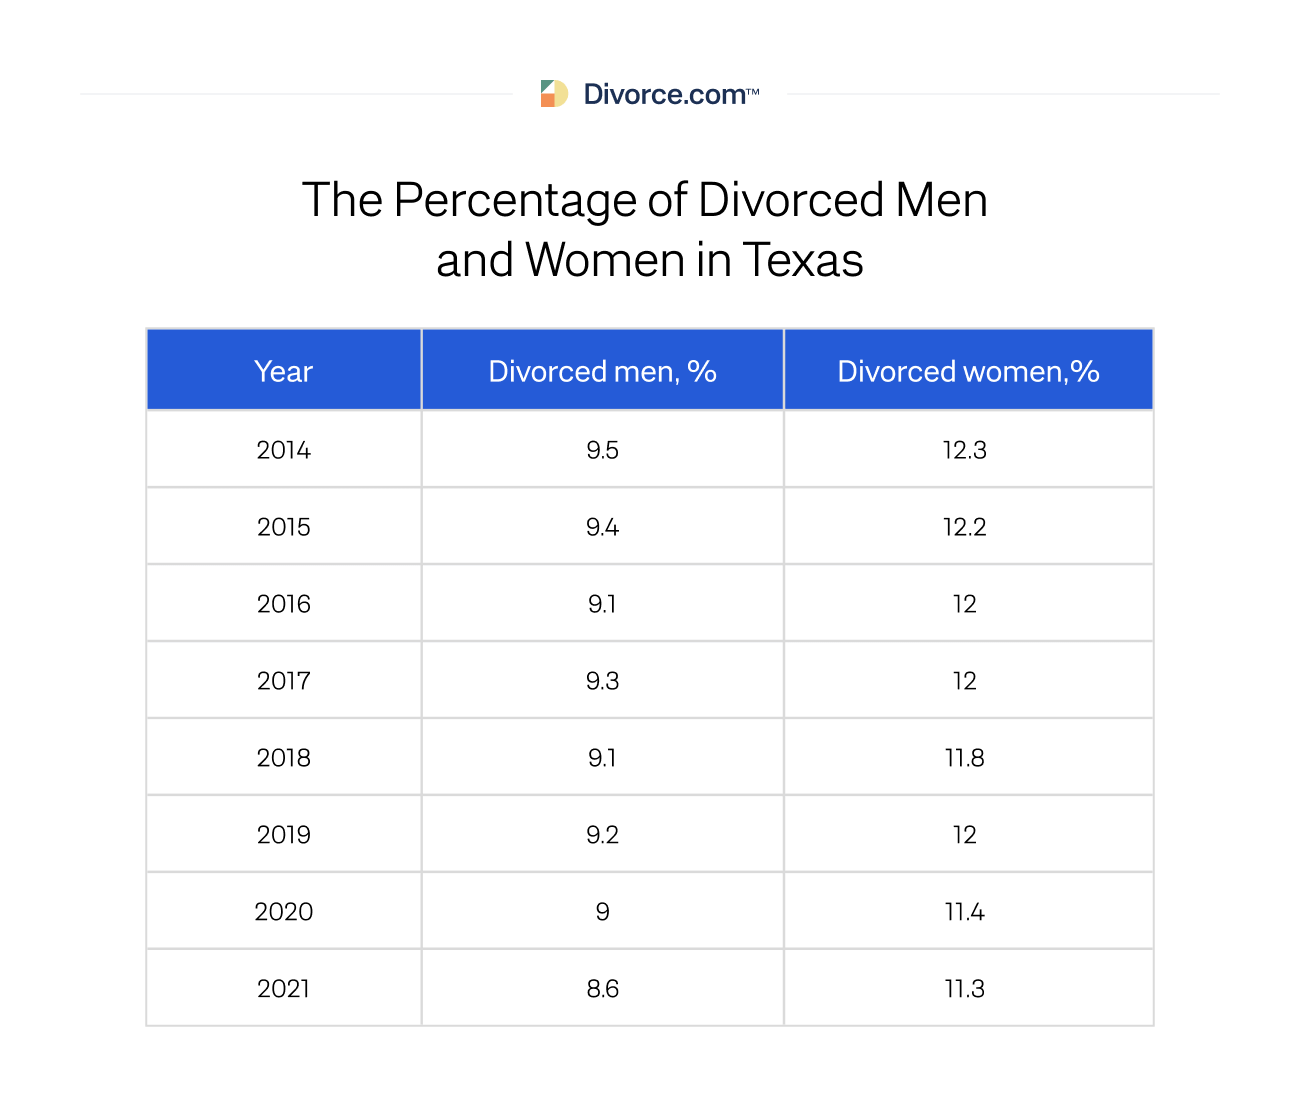 The percentage of divorced men in Texas is overall lower than women.